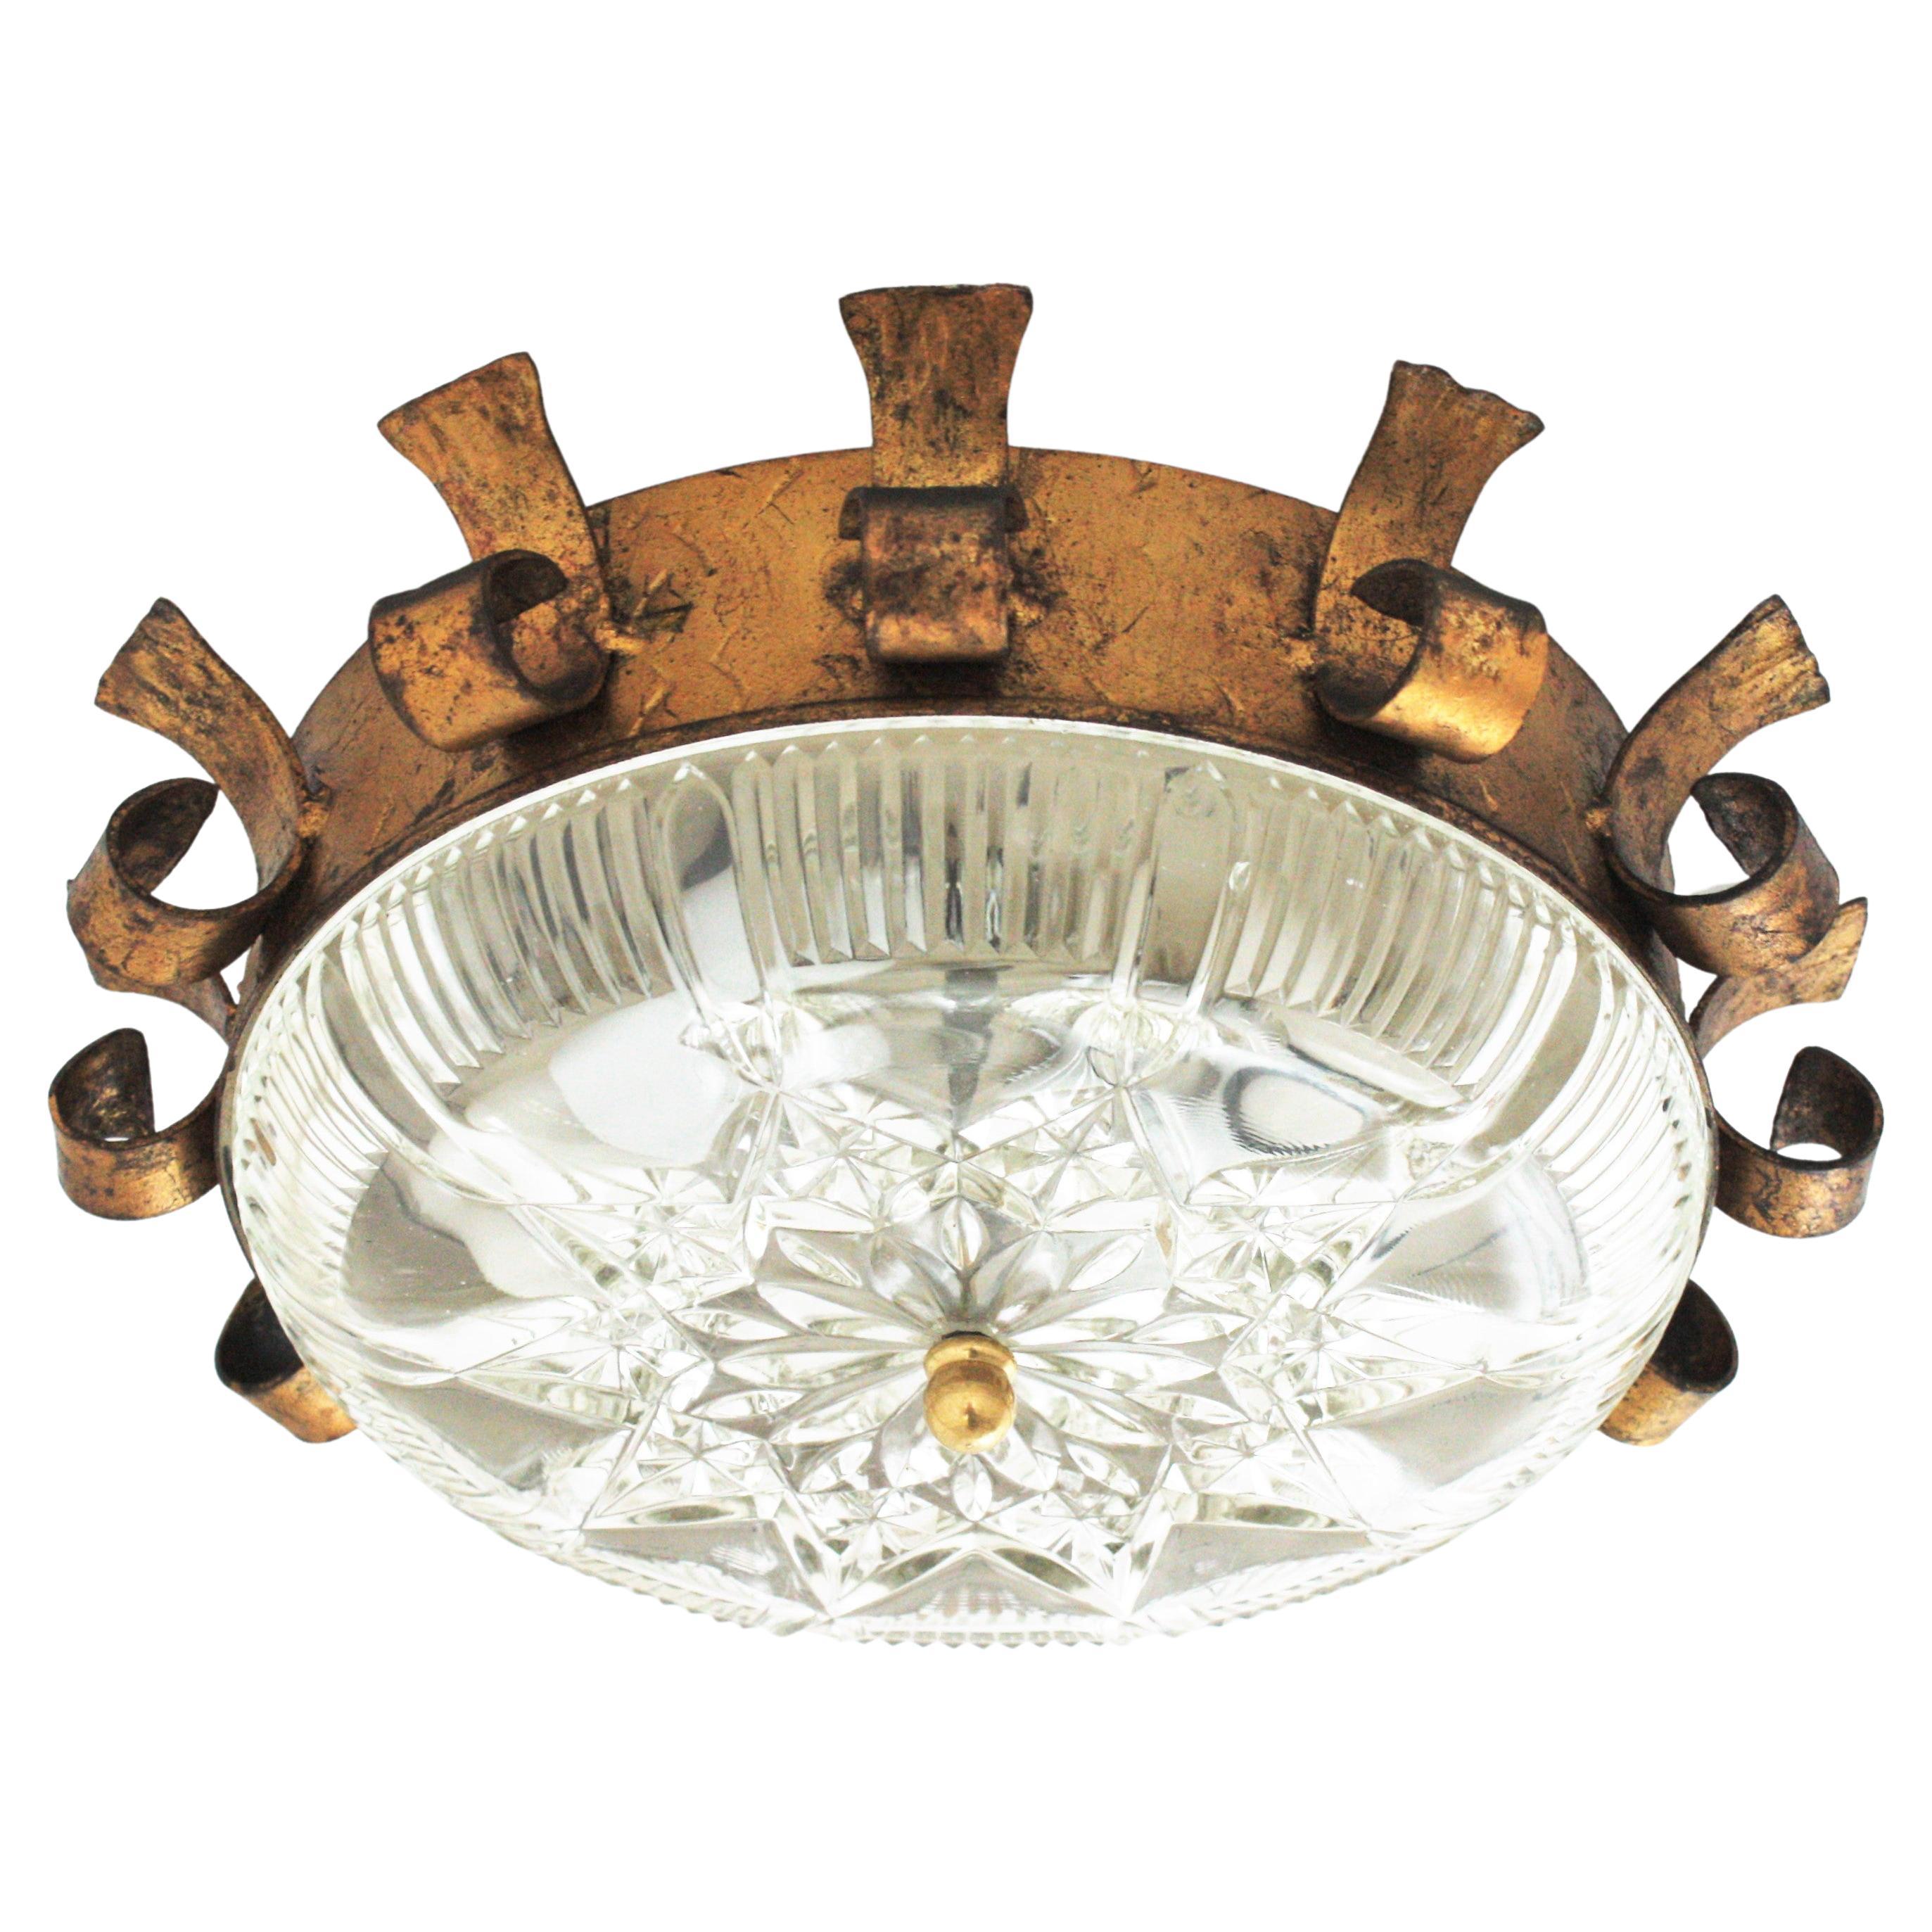 Sunburst Crown Light Fixture, Gilt Iron, Gold Leaf, Pressed Glass
Eye-catching neoclassical style sunburst ceiling light fixture from the Mid-Century Modern period, Spain, 1950s.
This ceiling fixture features a hand forged gilt iron sunburst crown